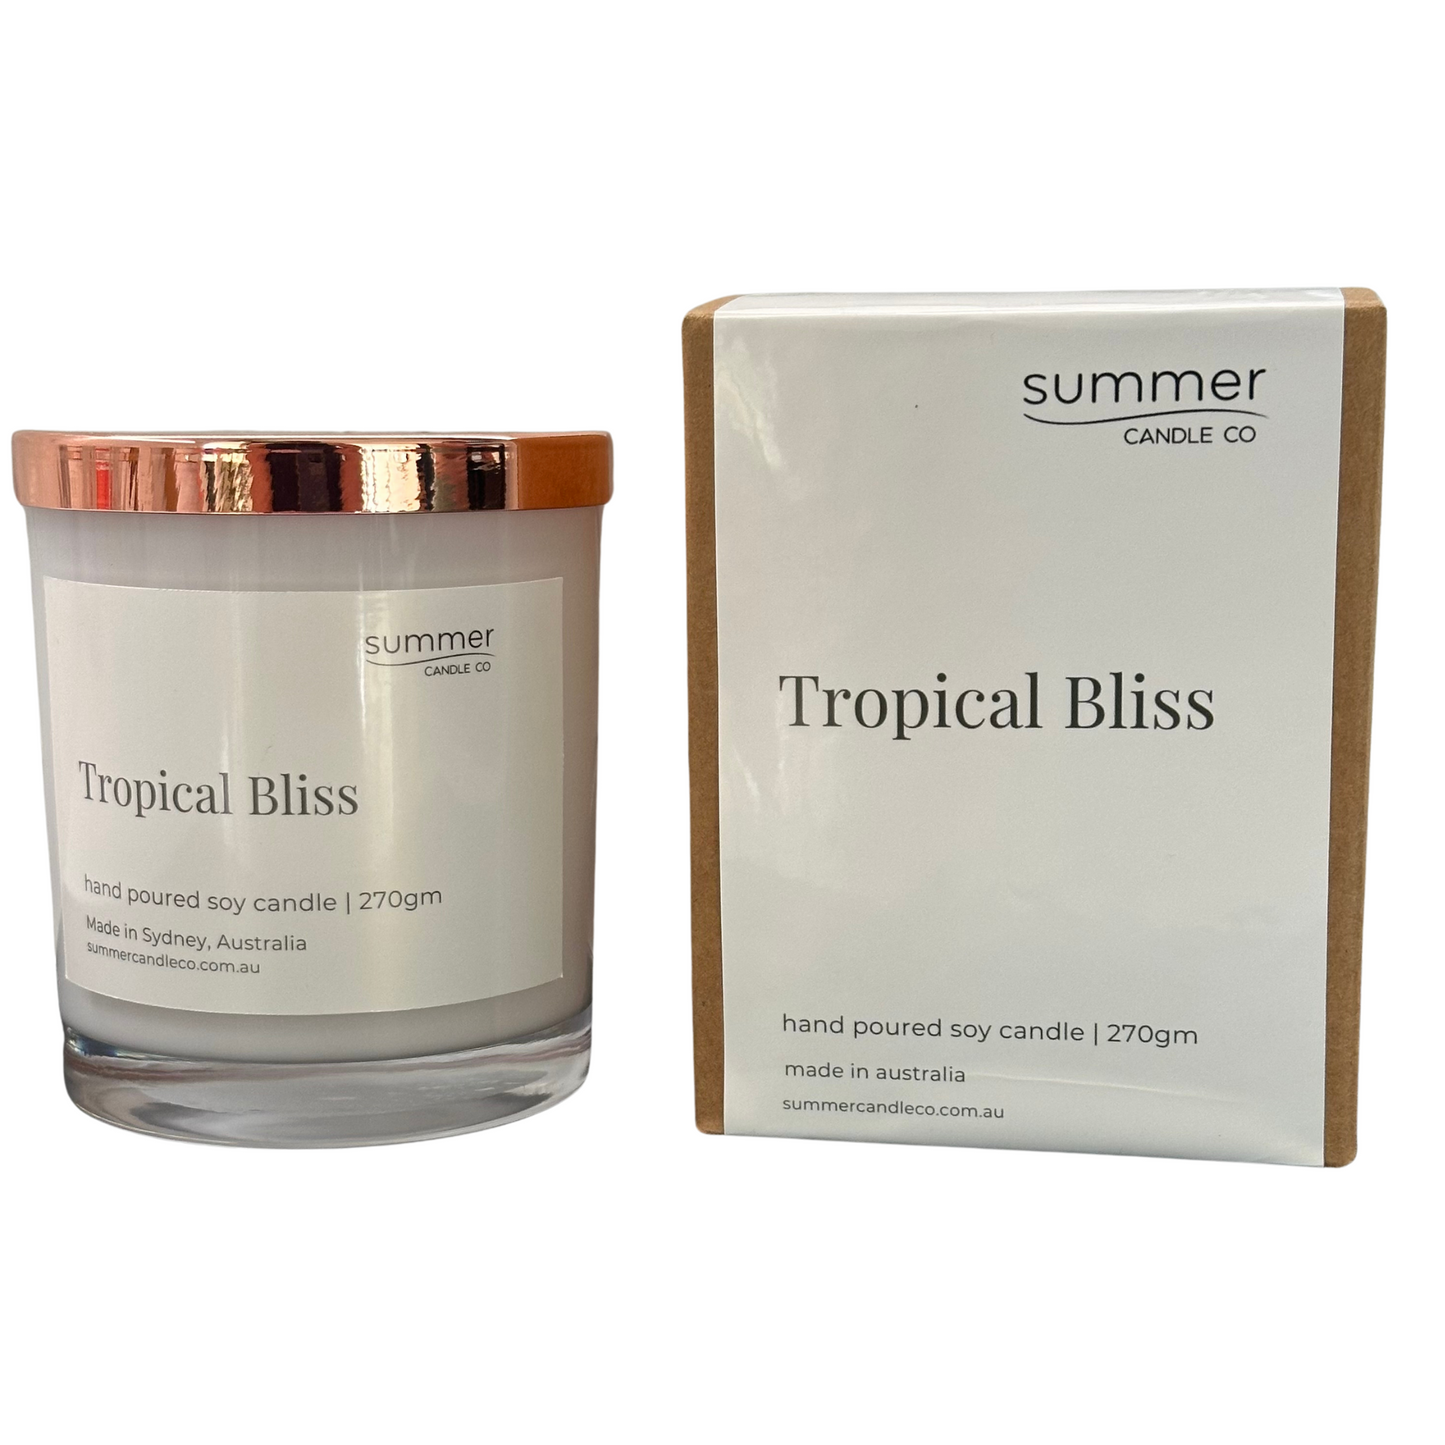 Tropical Bliss Soy Wax Candle